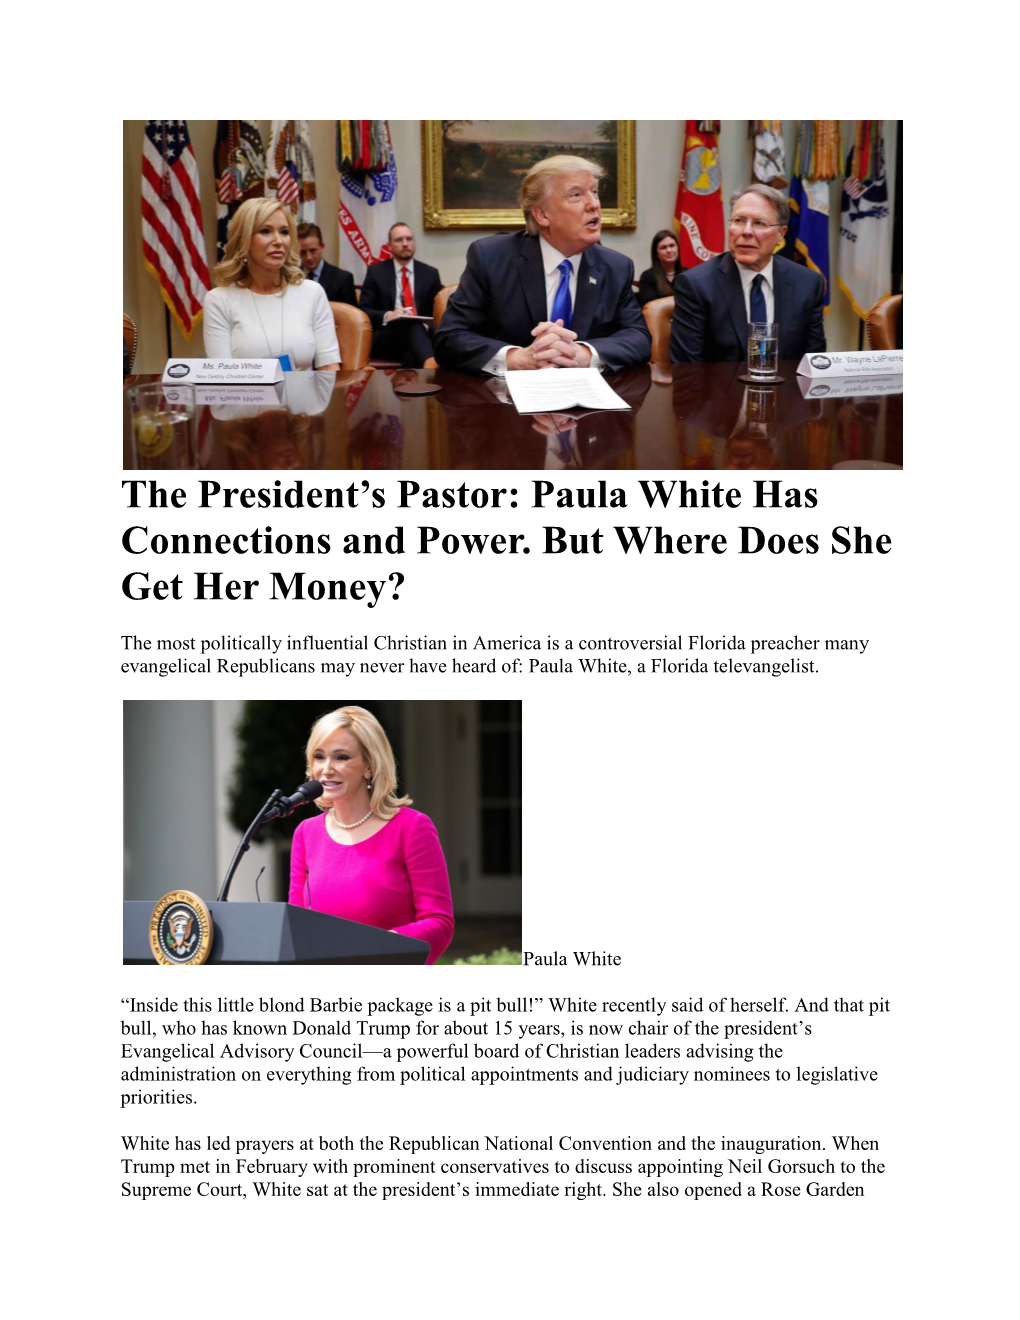 The President's Pastor: Paula White Has Connections and Power. But